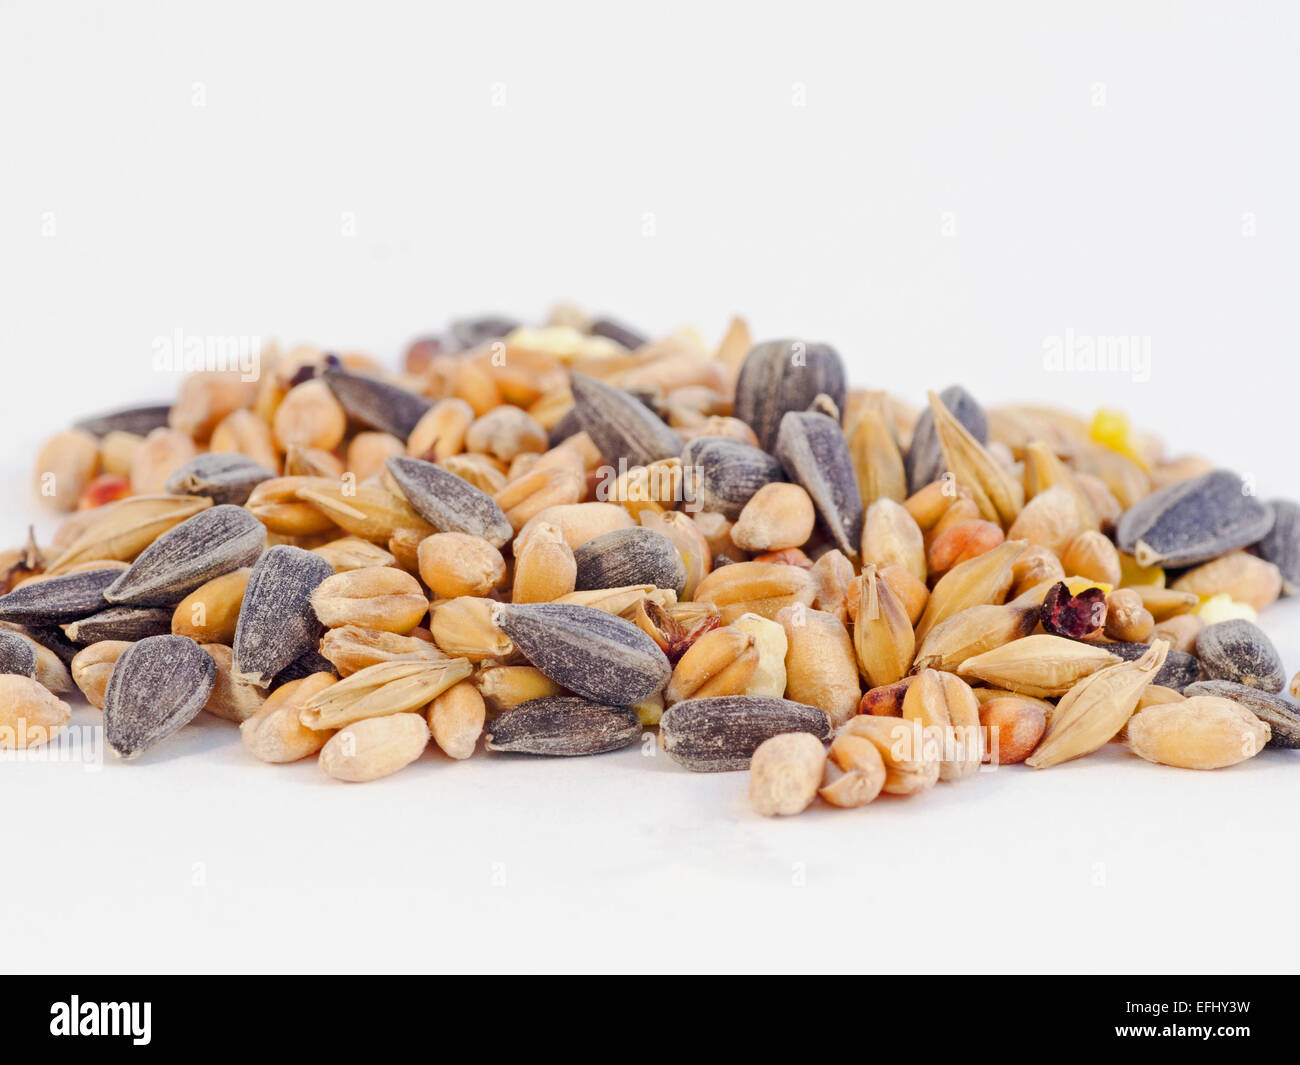 A small heap of a commercial mixed wild bird seed including wheat, oats and sunflower seeds Stock Photo